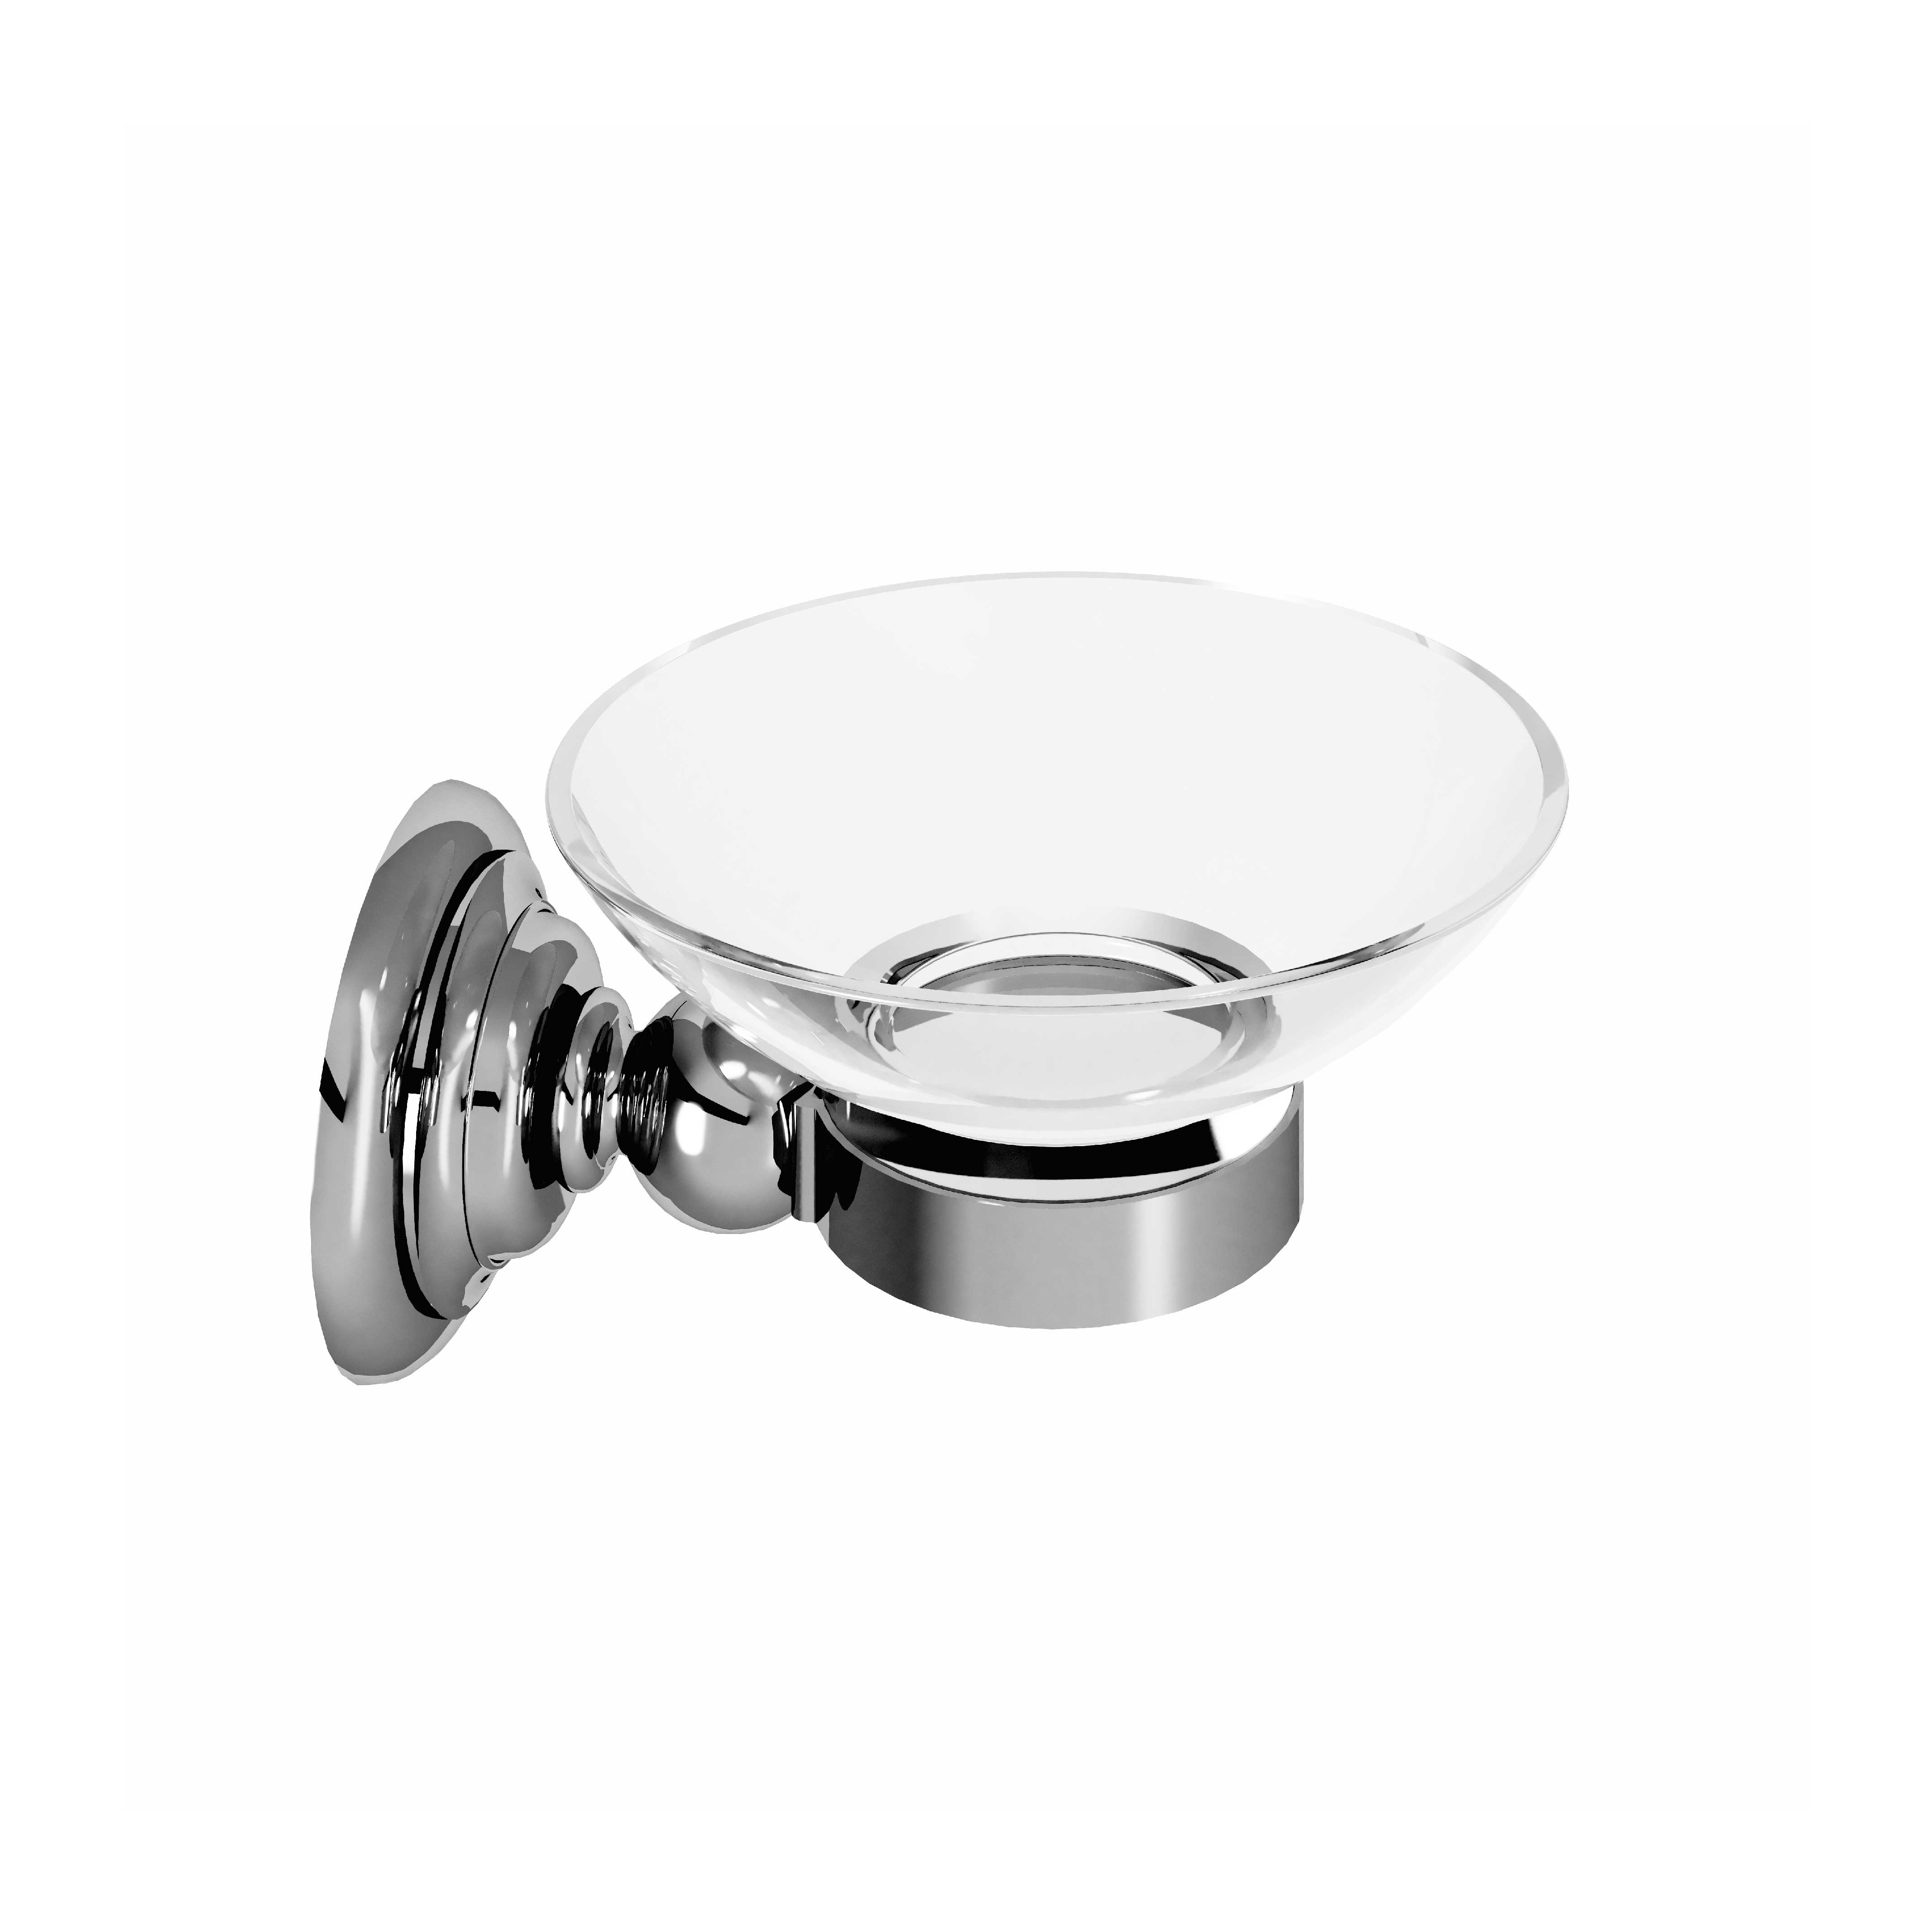 M20-515 Wall mounted soap dish holder